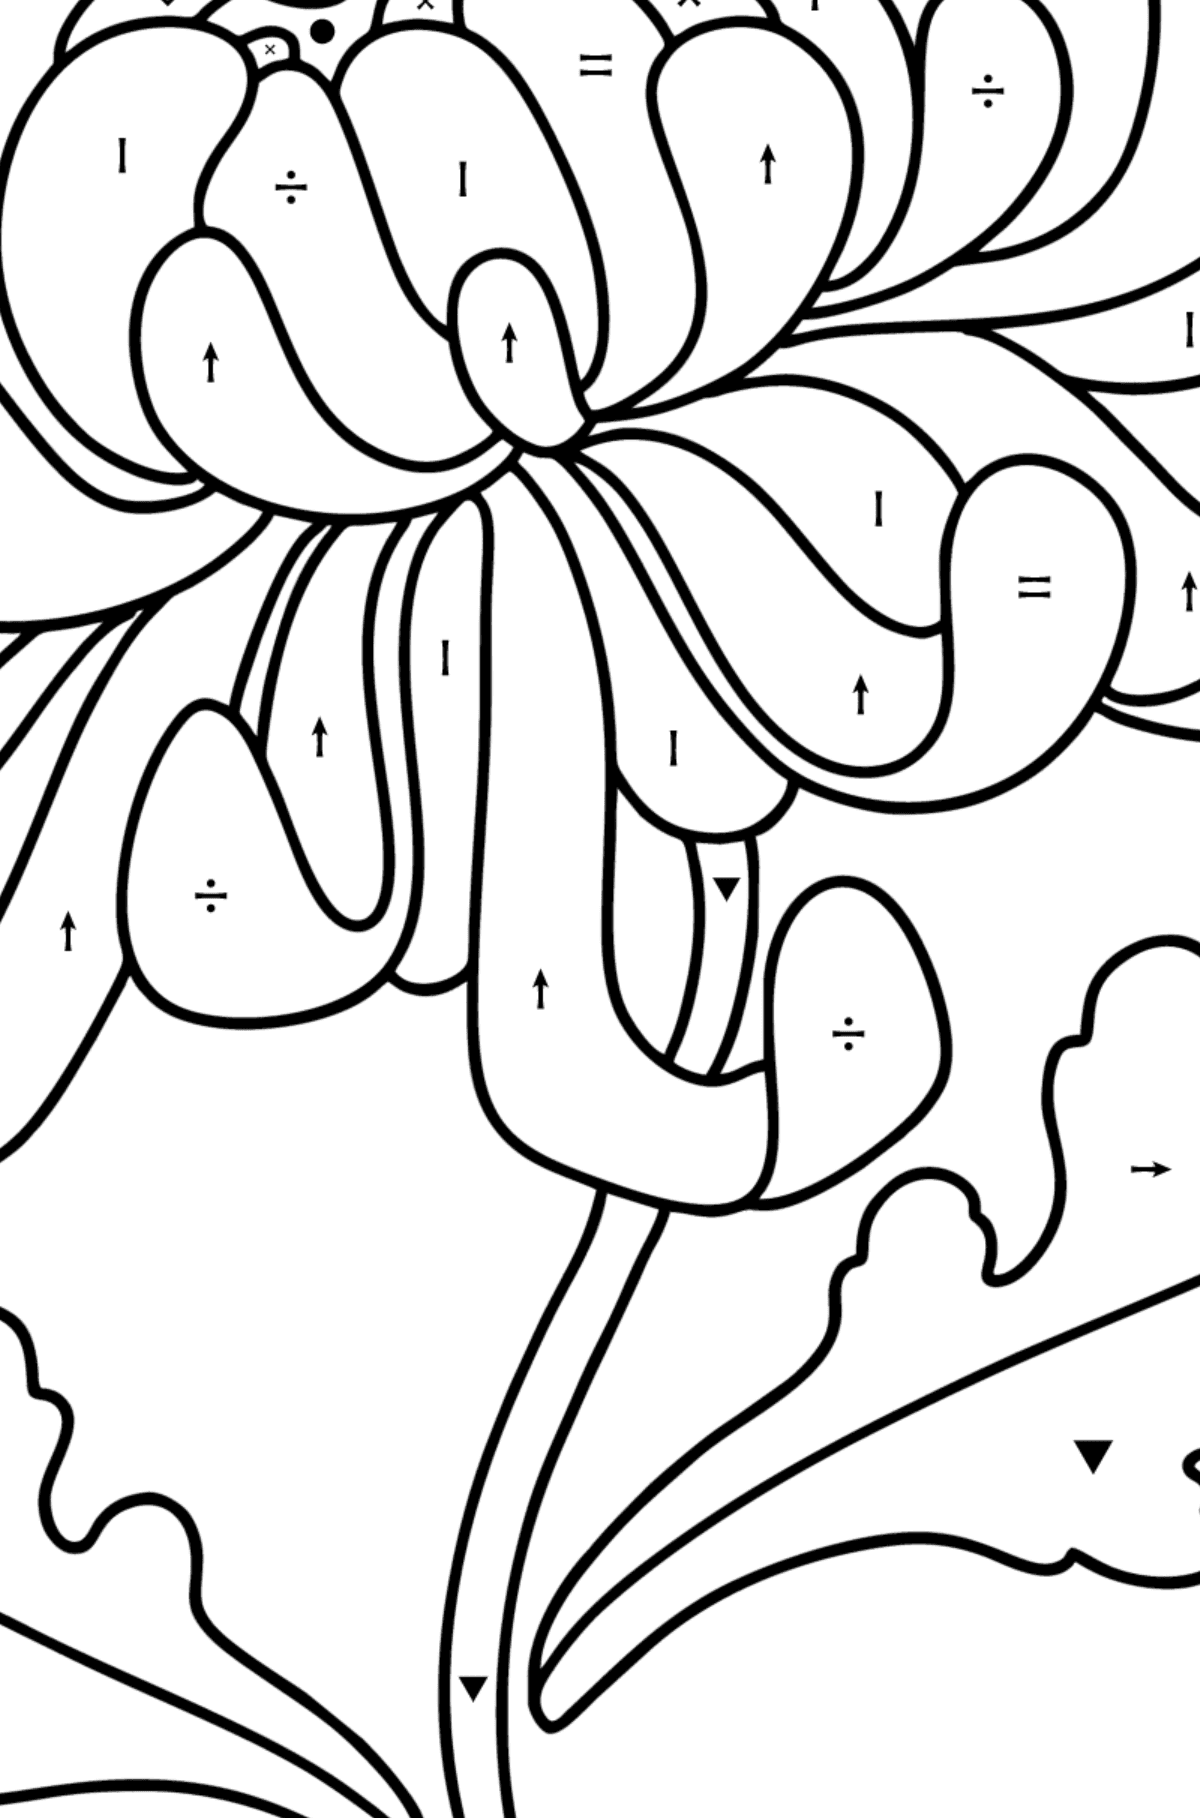 Chrysanthemums coloring page - Coloring by Symbols for Kids